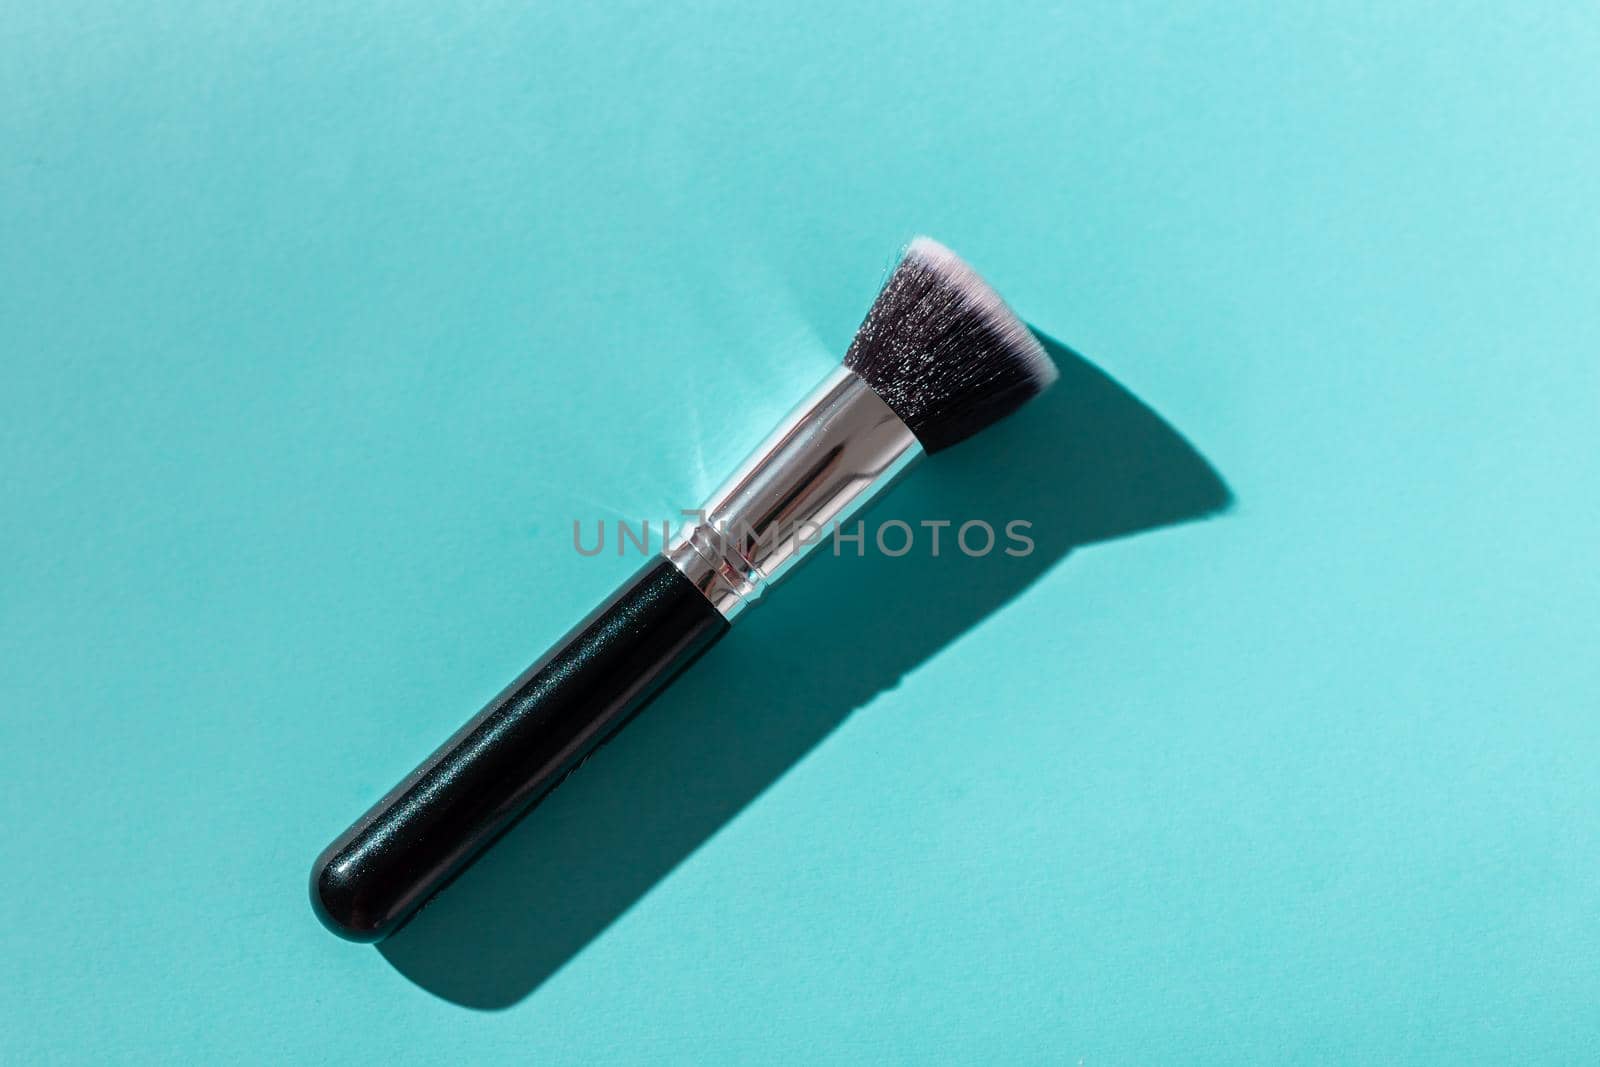 Make up brush on turquoise background, top view. by Satura86